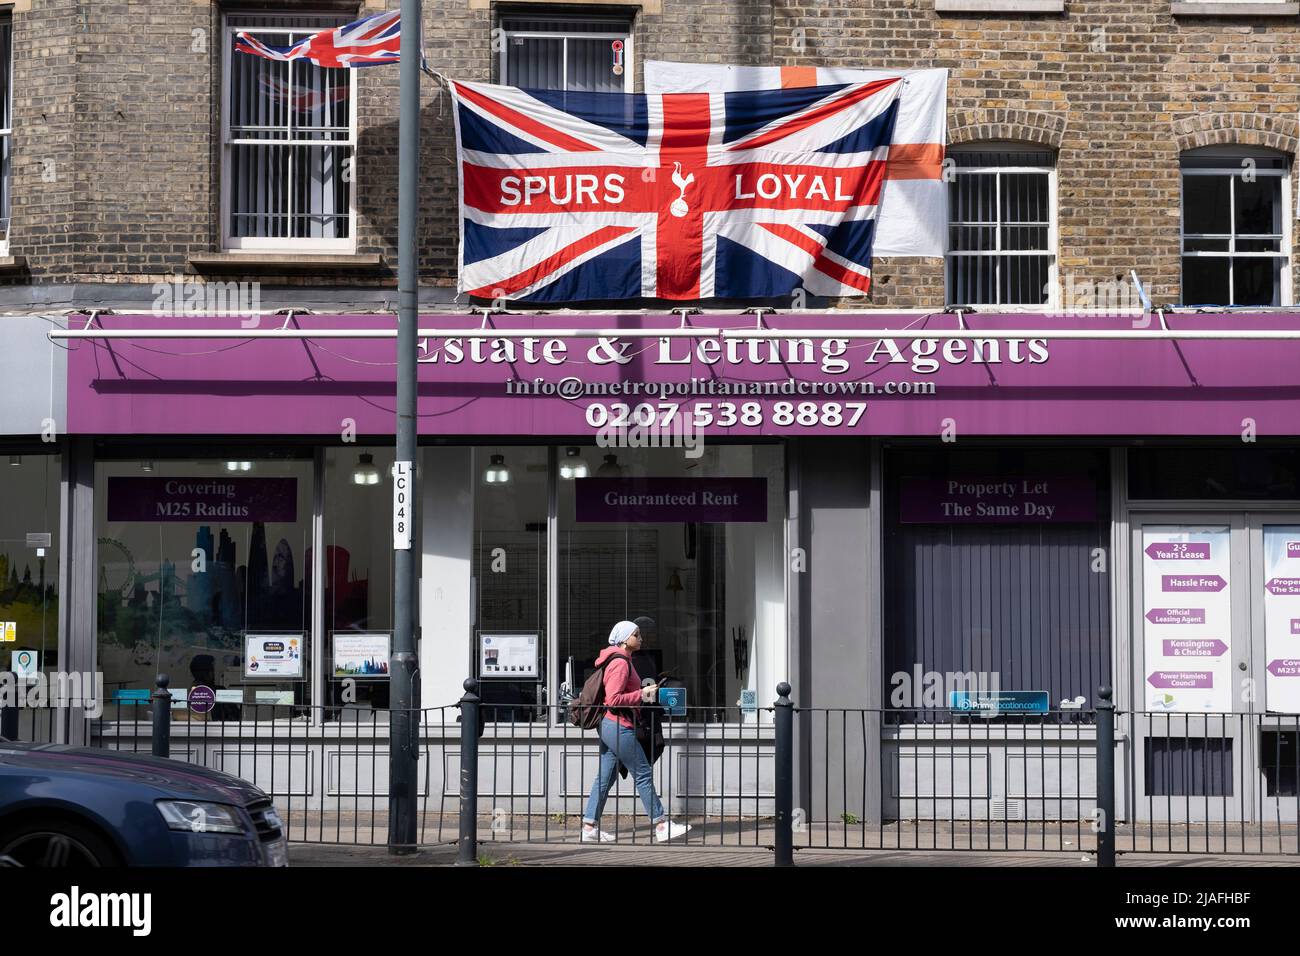 Spurs loyal Union Jack flag hanging from a flat above shops on 18th May 2022 in East London, United Kingdom. Tottenham Hotspur Football Club, commonly referred to as Spurs, is an English professional football club based in Tottenham, that competes in the Premier League. Stock Photo